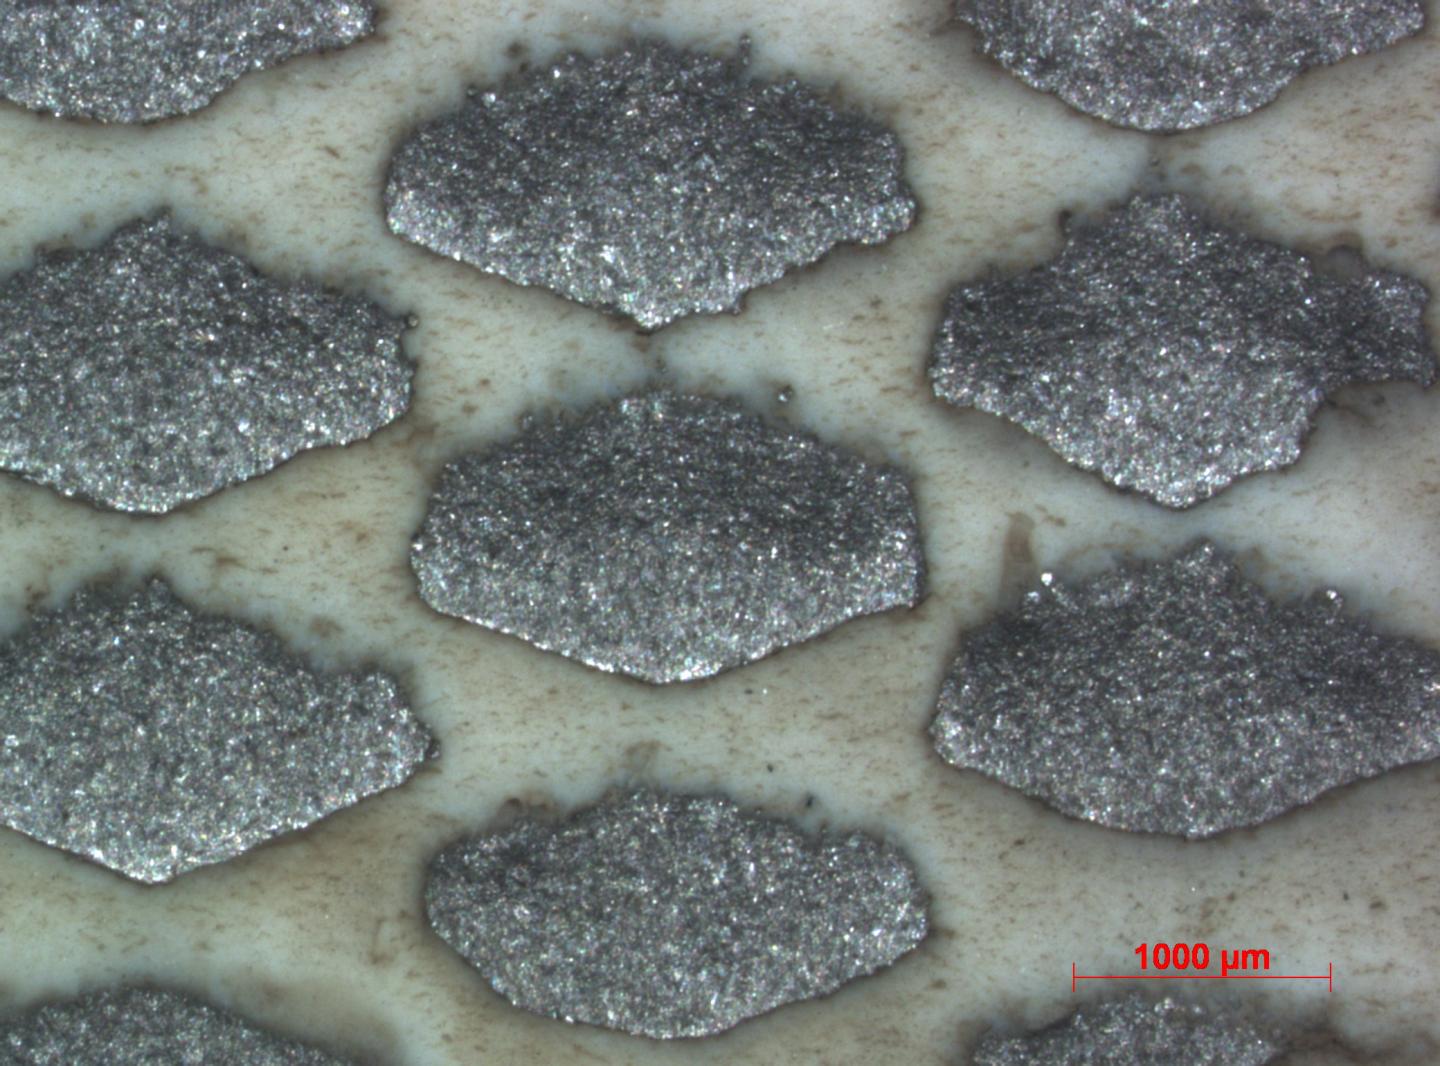 Optical Image of Material Surface after Erosion Testing